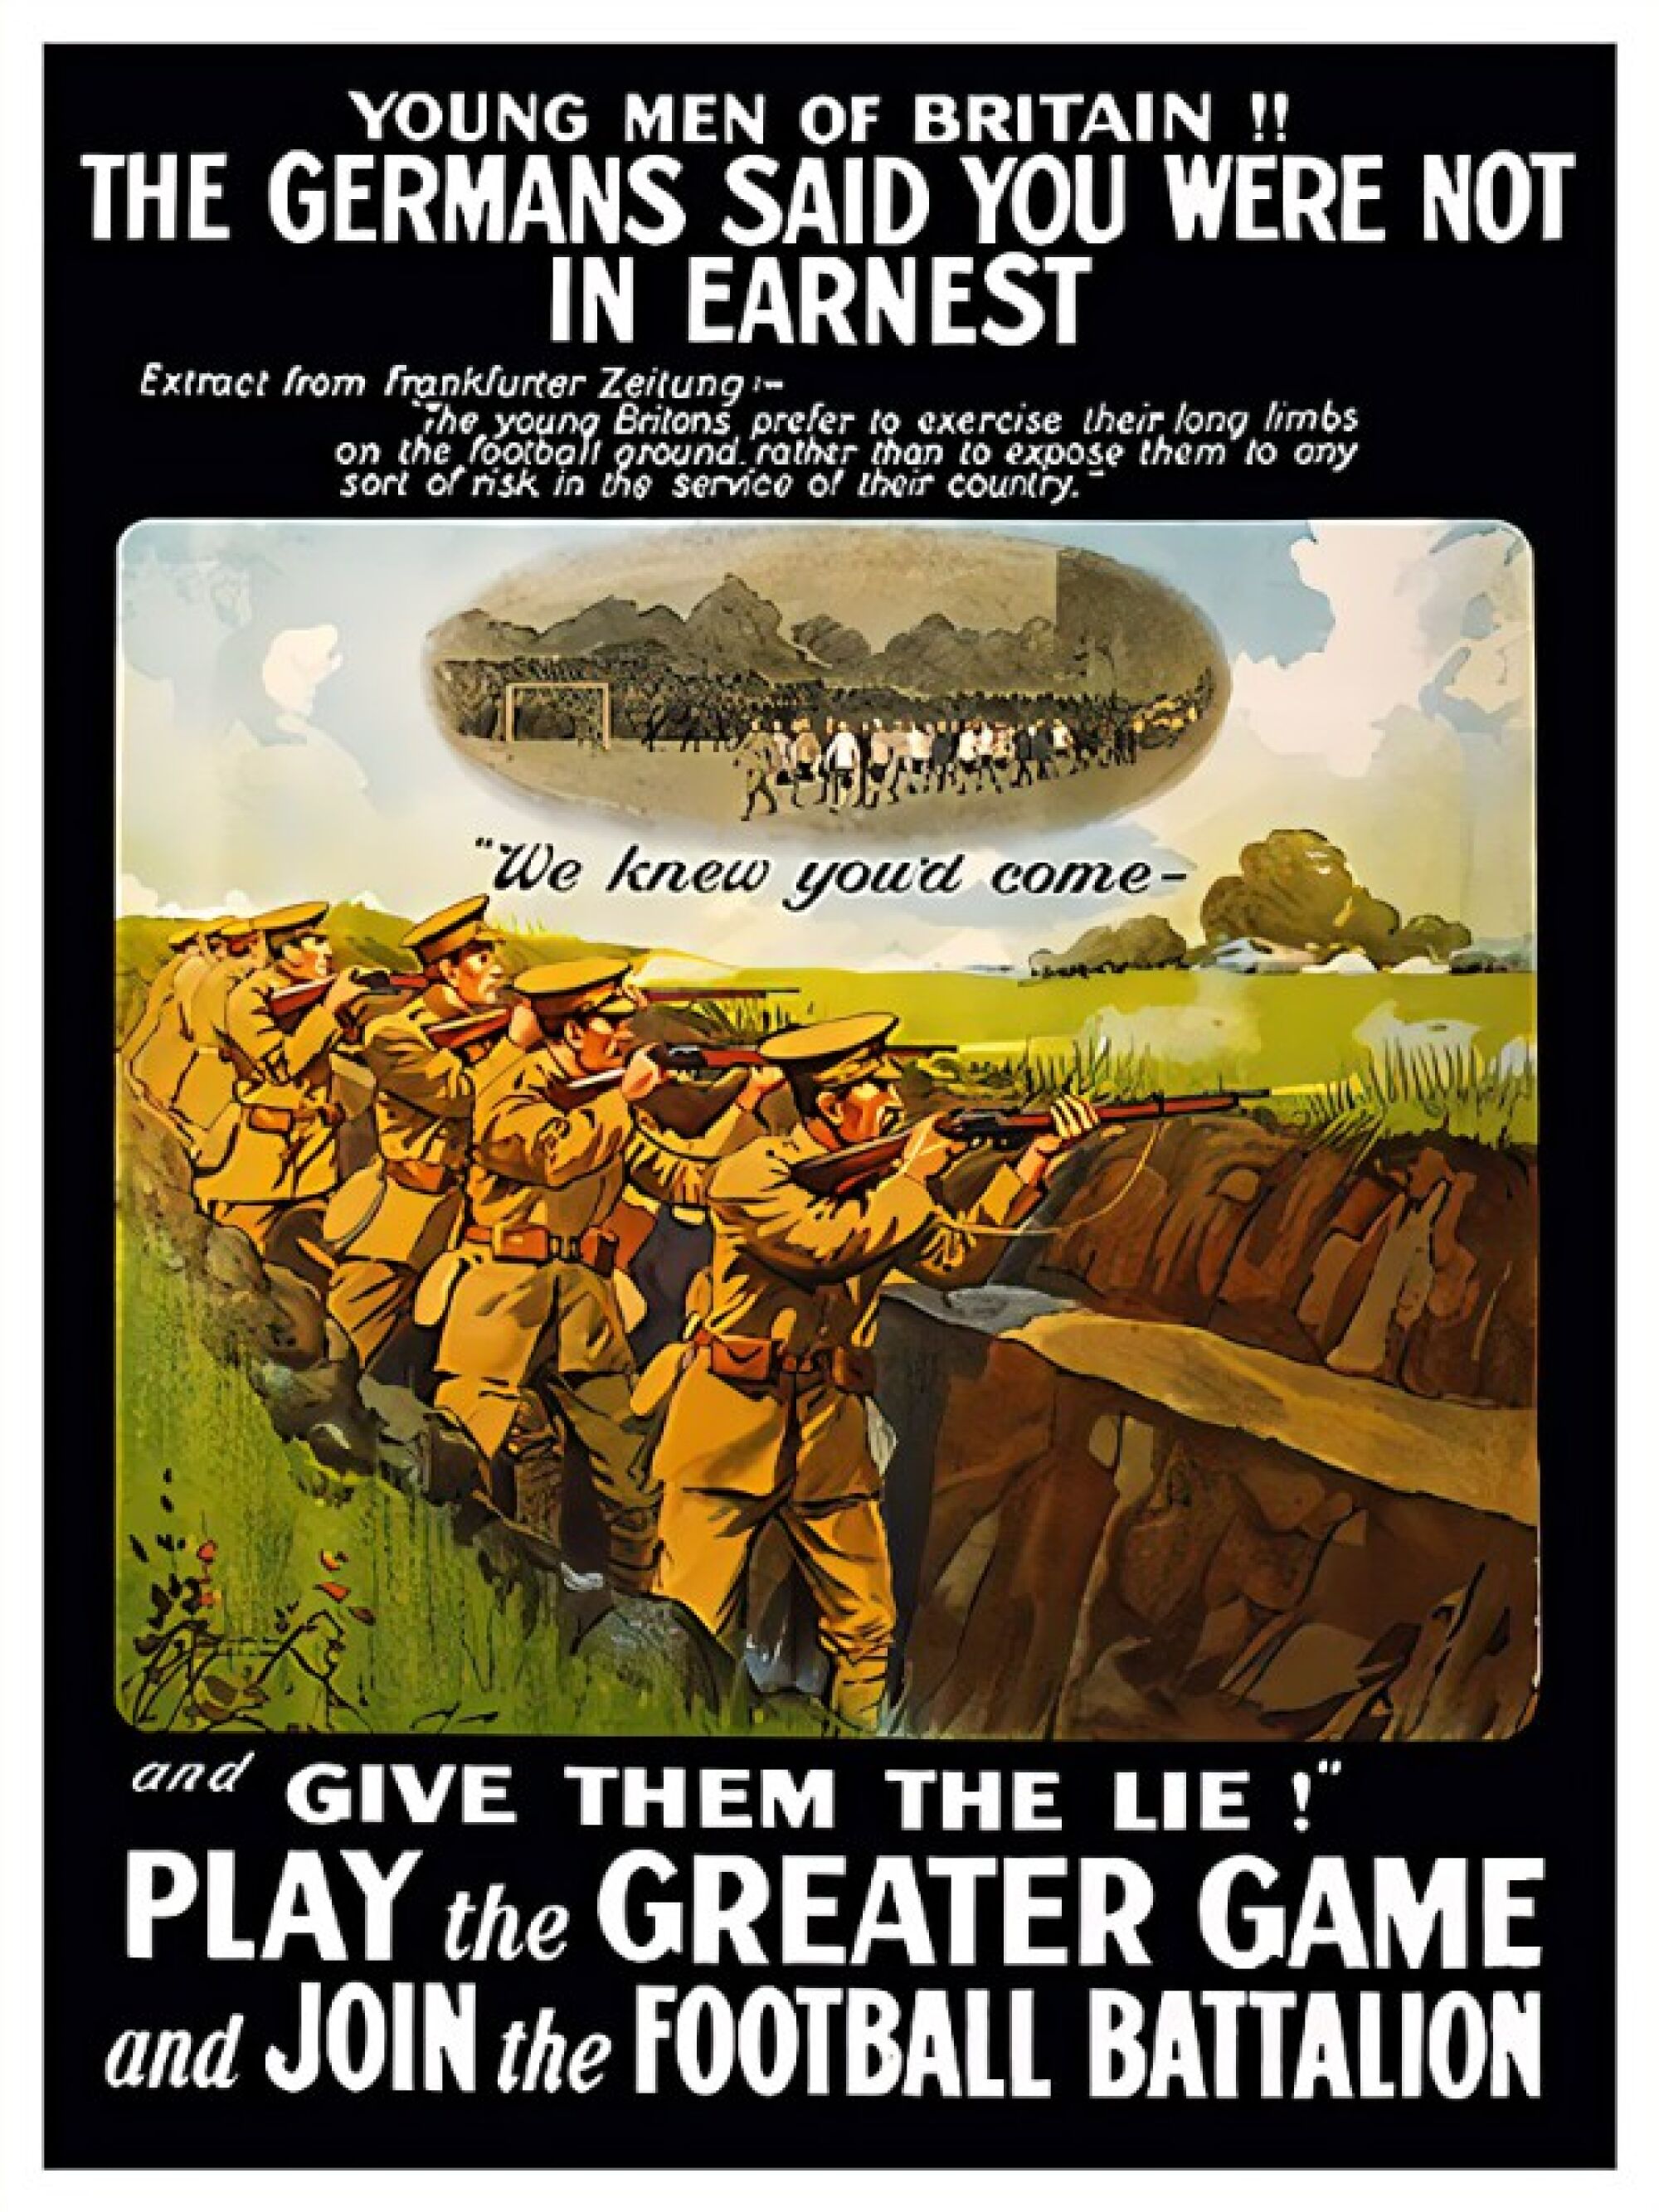 A British World War I recruiting poster urges soccer players to join the military to defend their country 